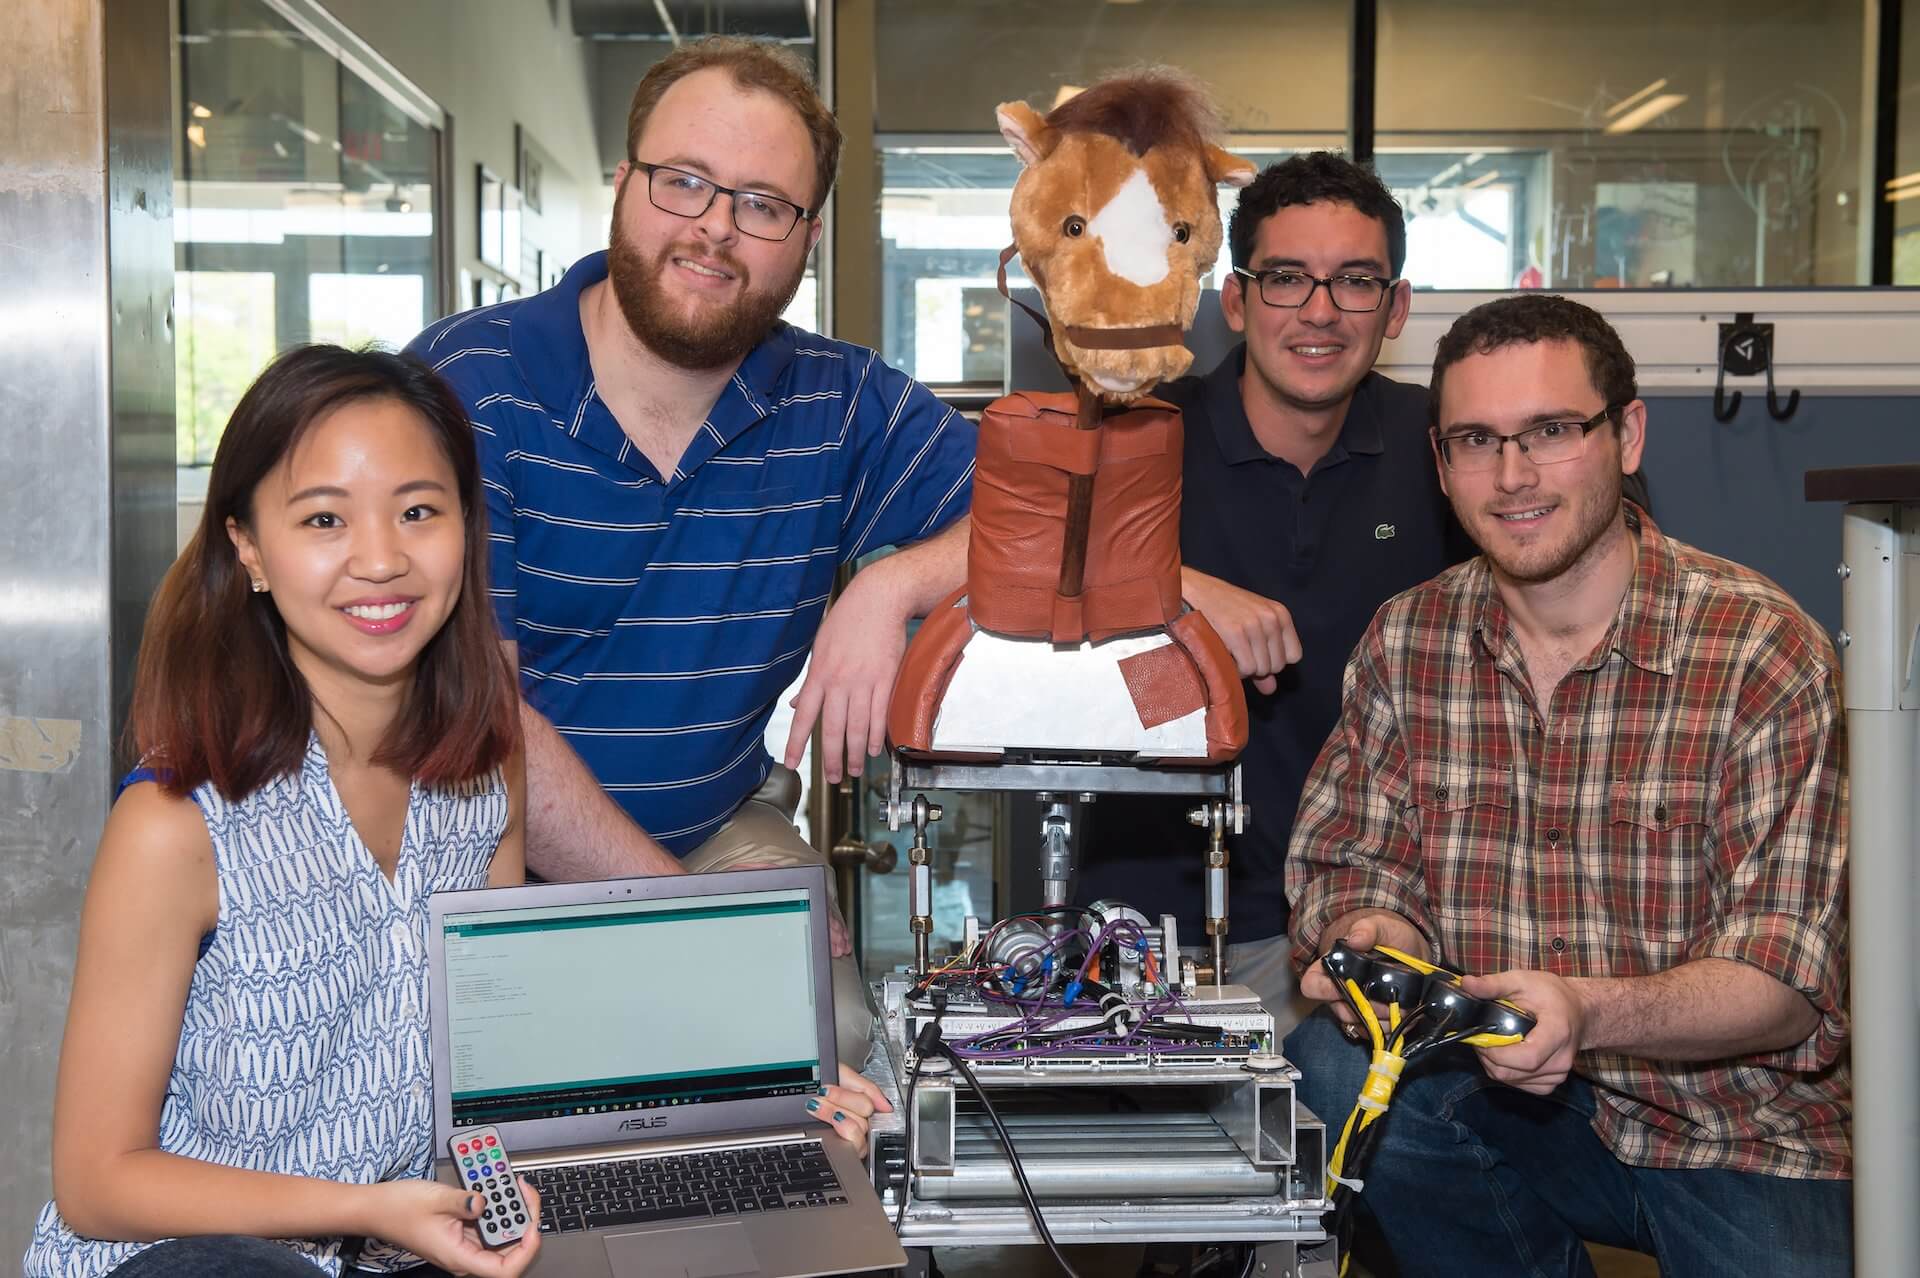 The Hippo Riders team of Rice University engineering students has created a horse simulator for use by hippotherapy patients. From left: Amy Ryu, Erik Hansen, Jaime Gomez and Brett Berger. (Credit: Jeff Fitlow/Rice University)